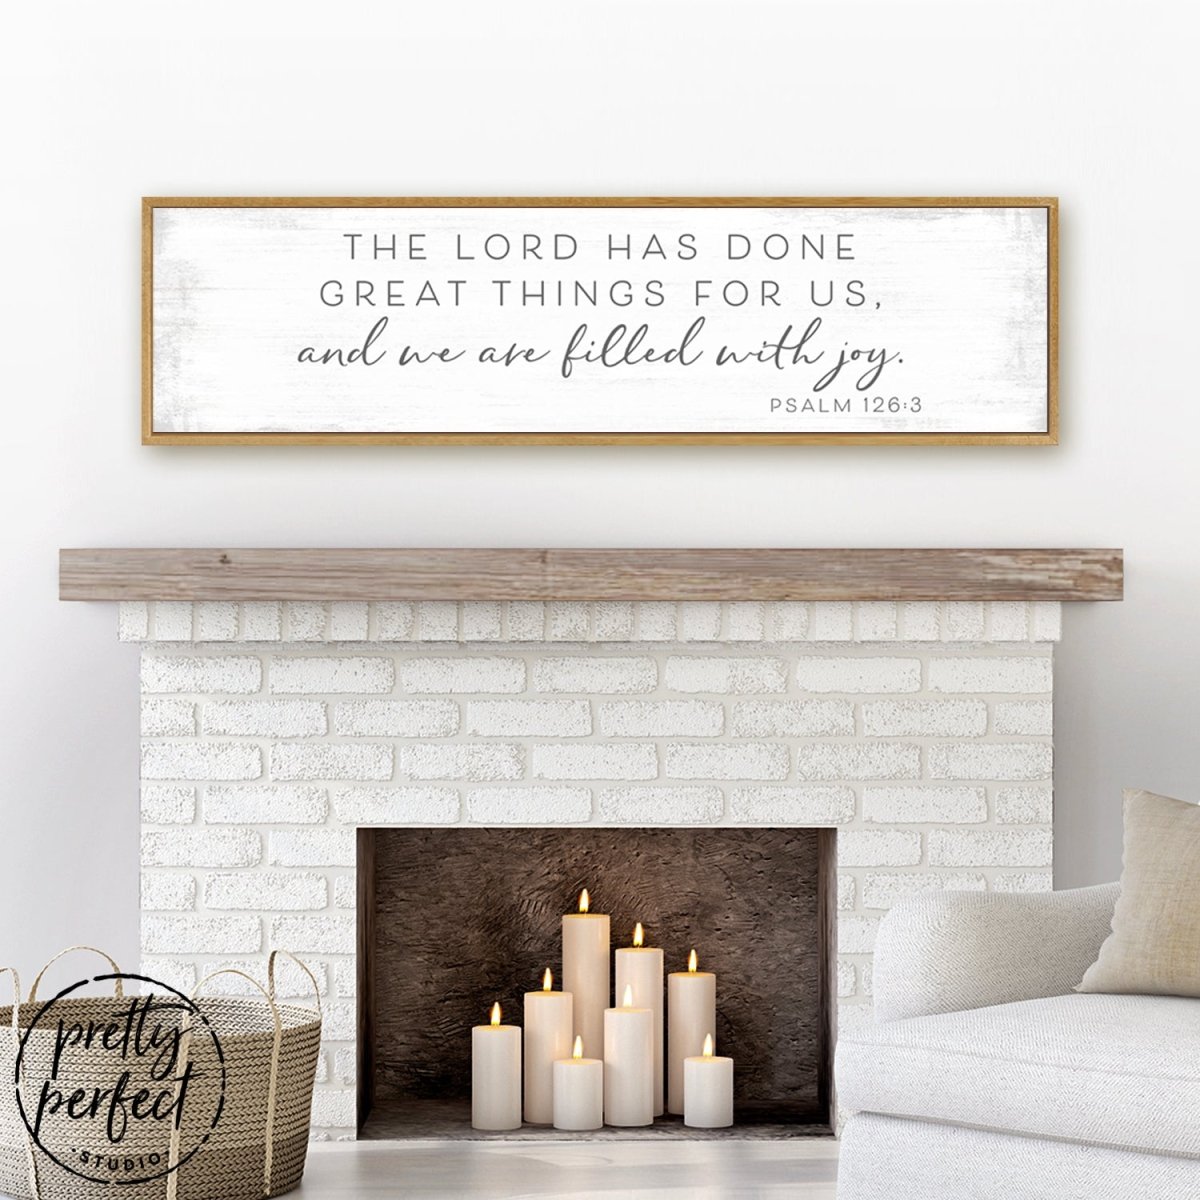 The Lord Has Done Great Things For Us Sign Above the Fireplace - Pretty Perfect Studio